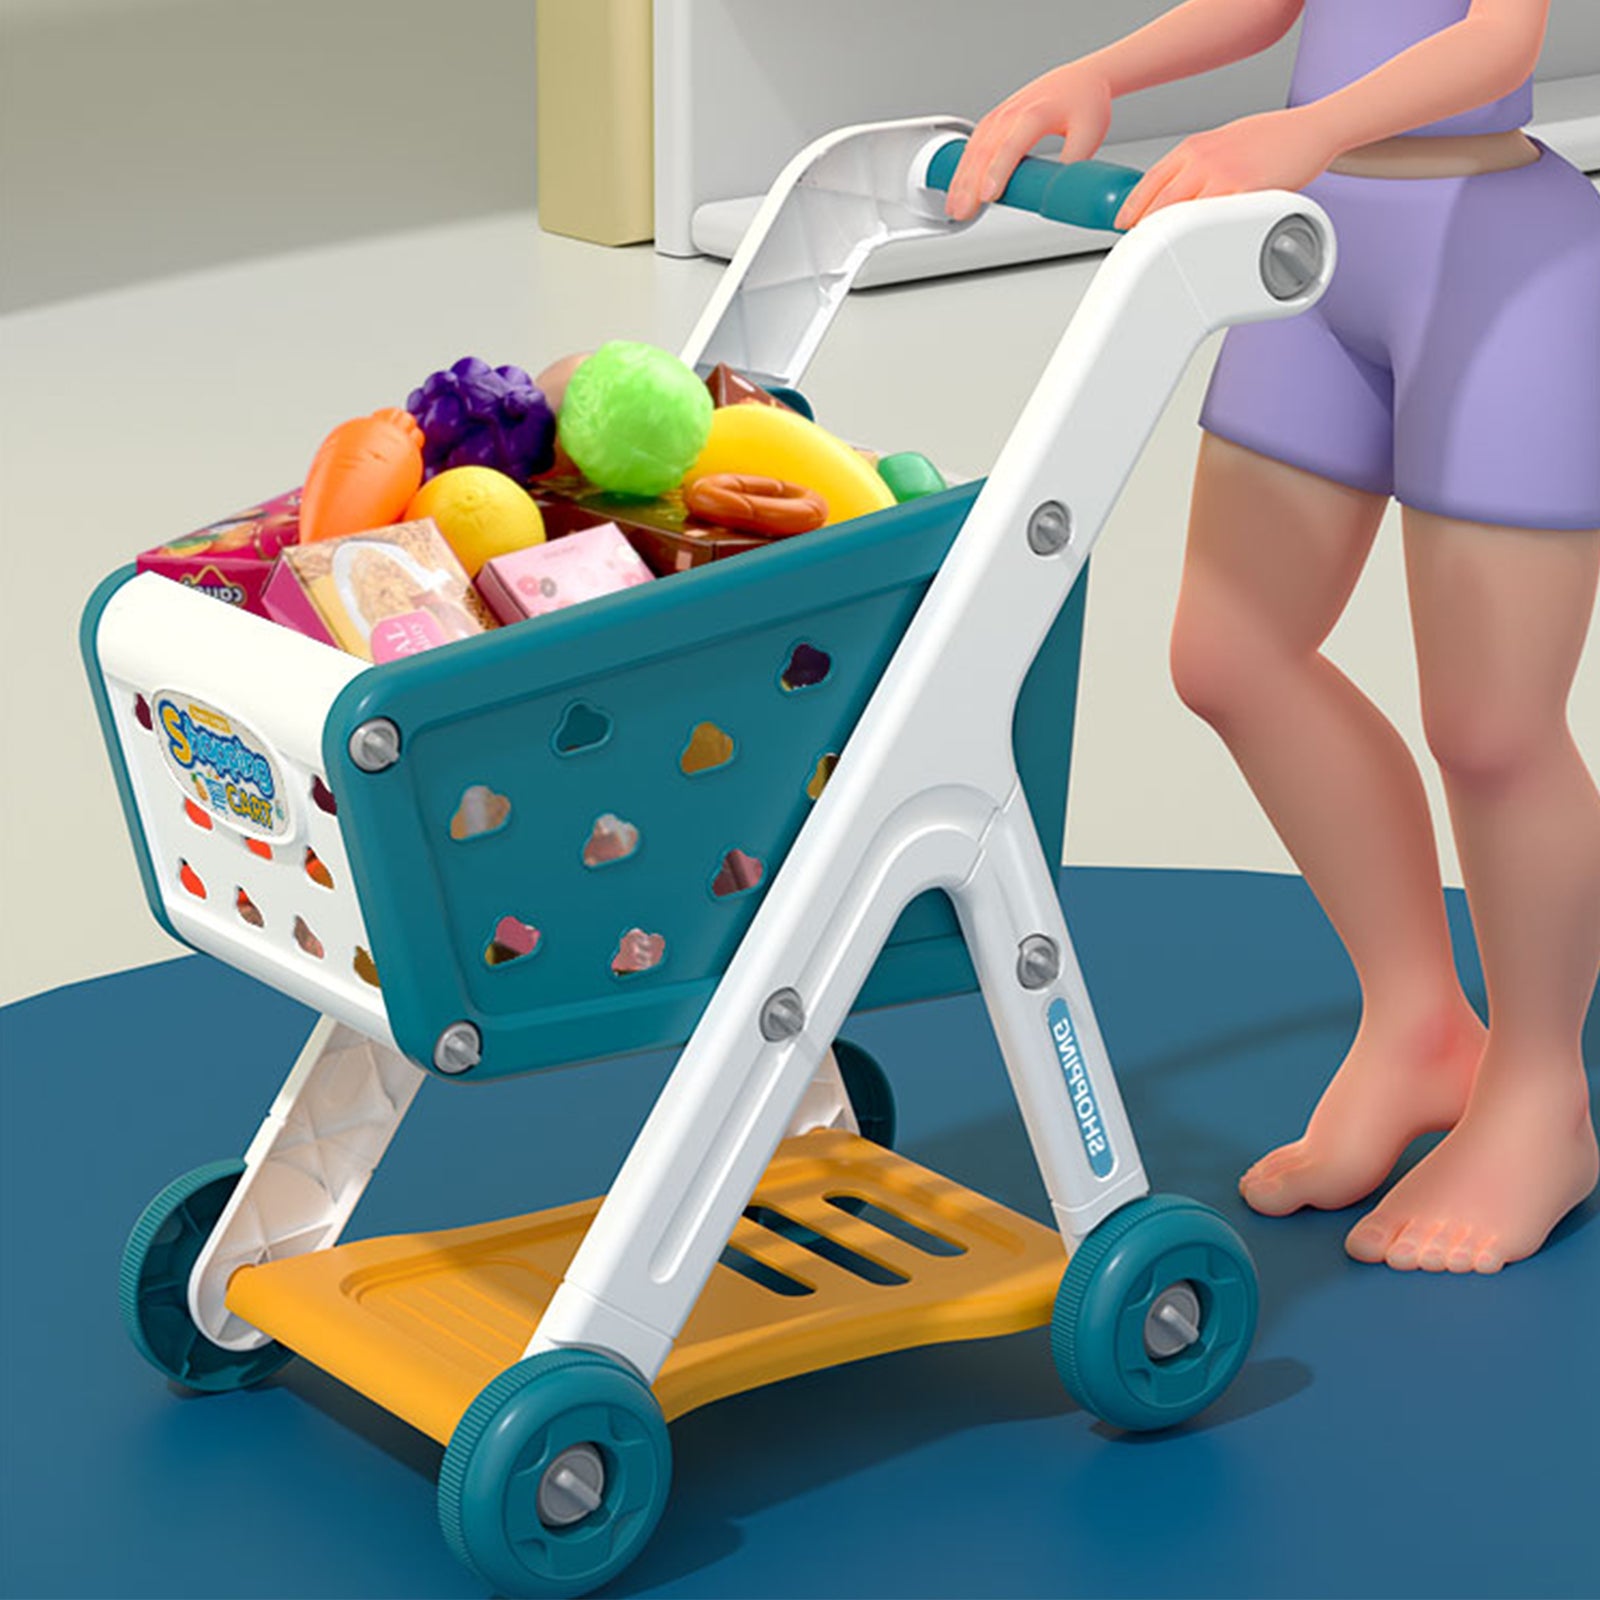 plastic shopping cart toy